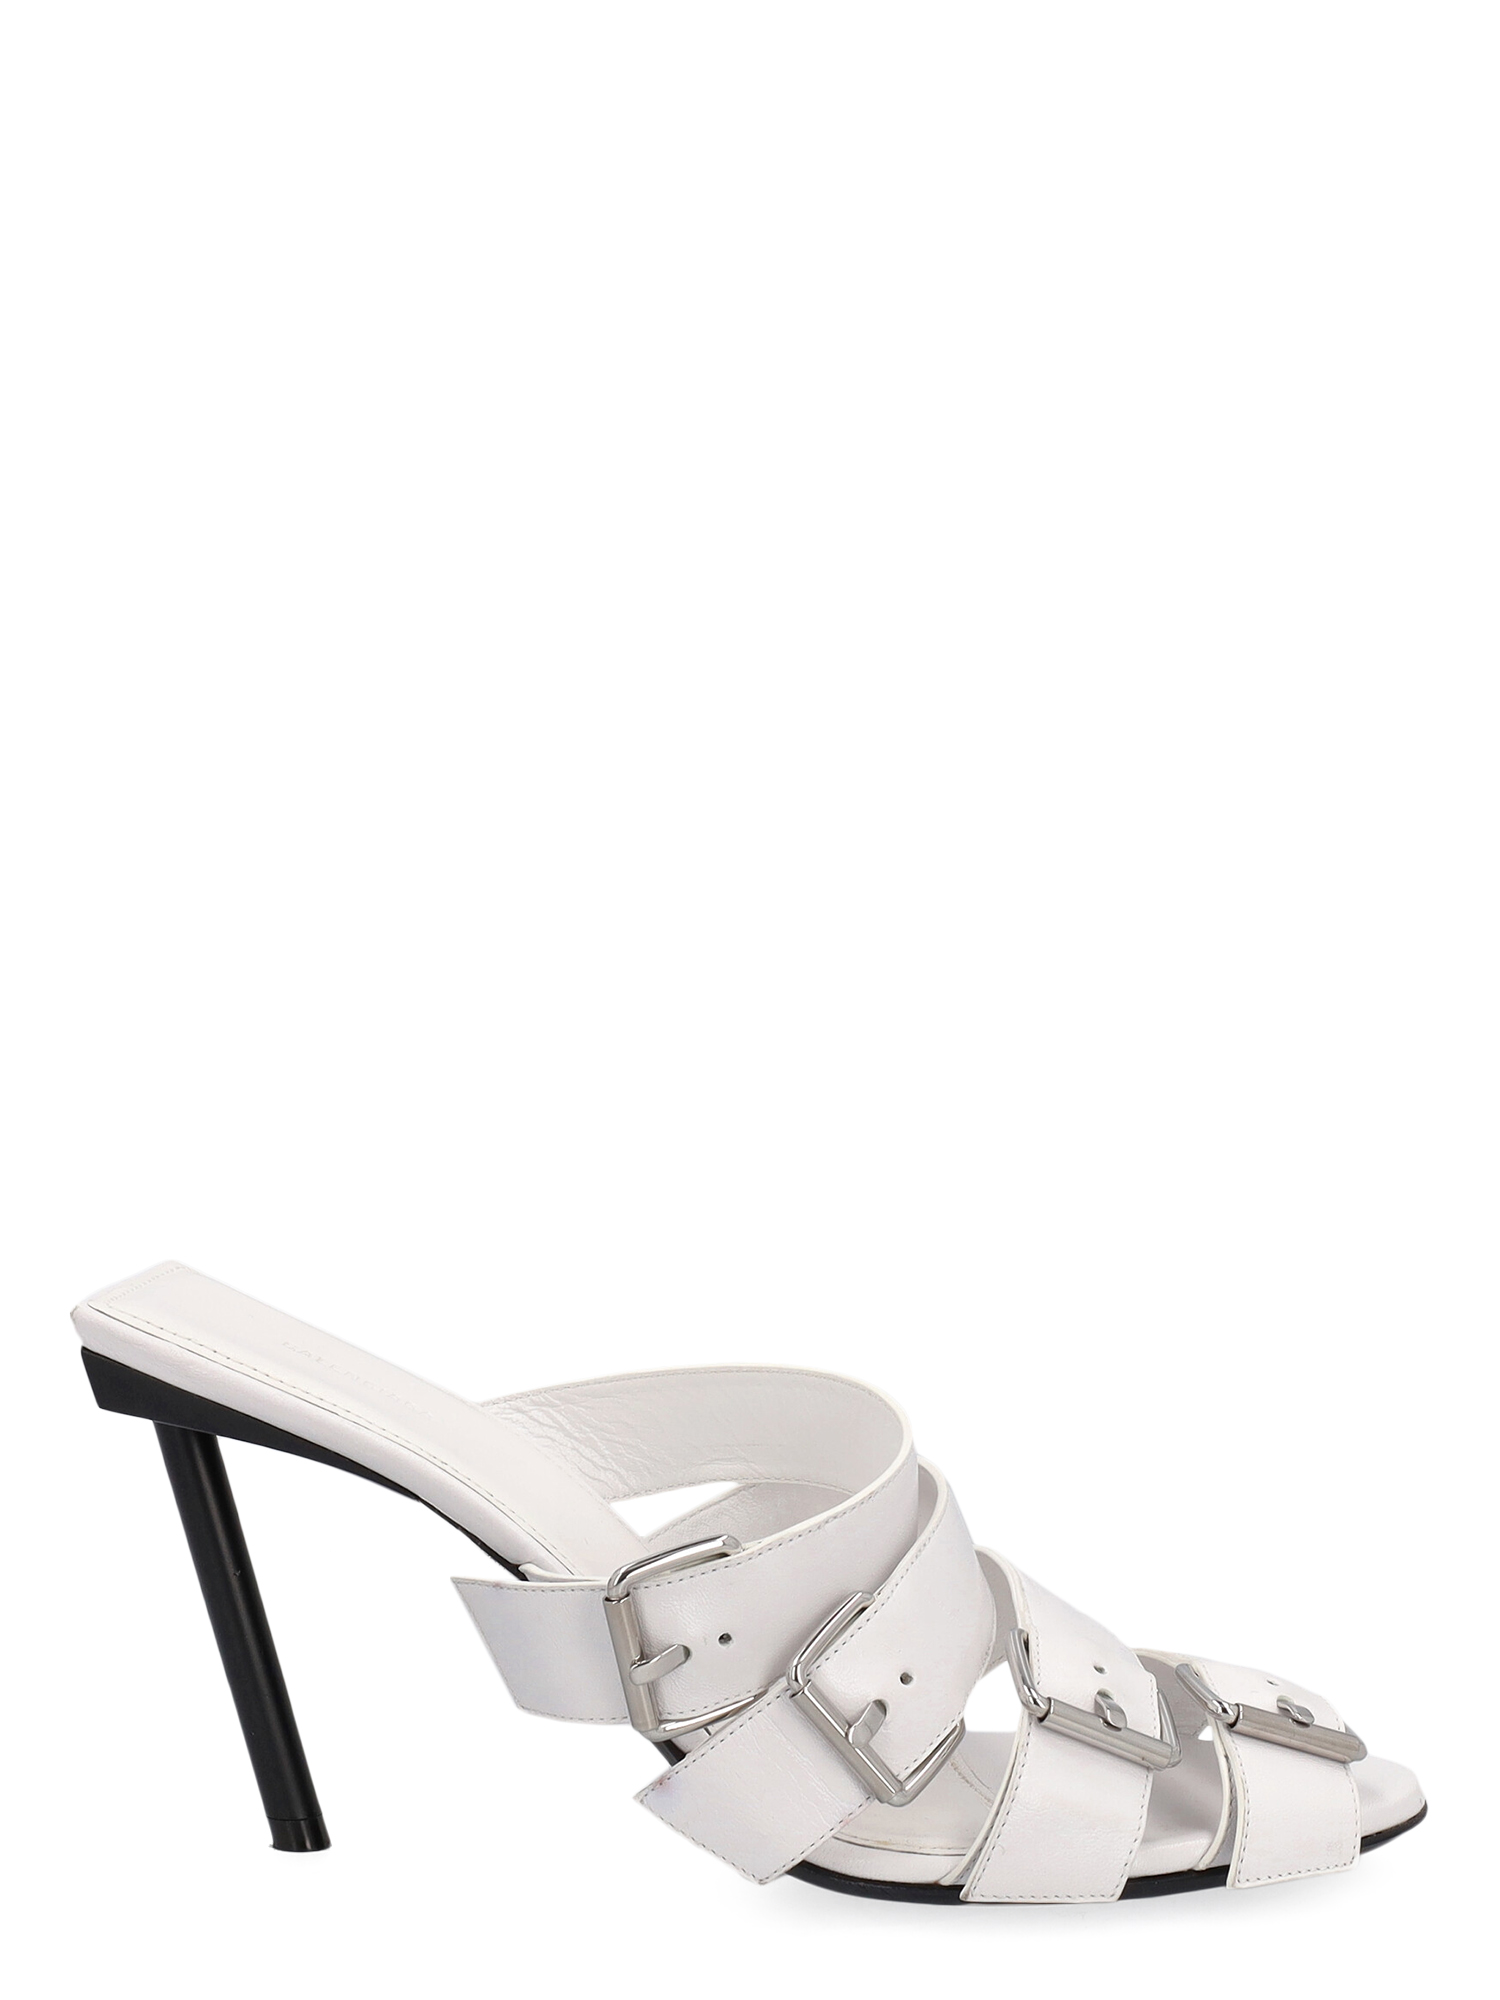 Pre-owned Balenciaga Women's Mules -  - In White Leather